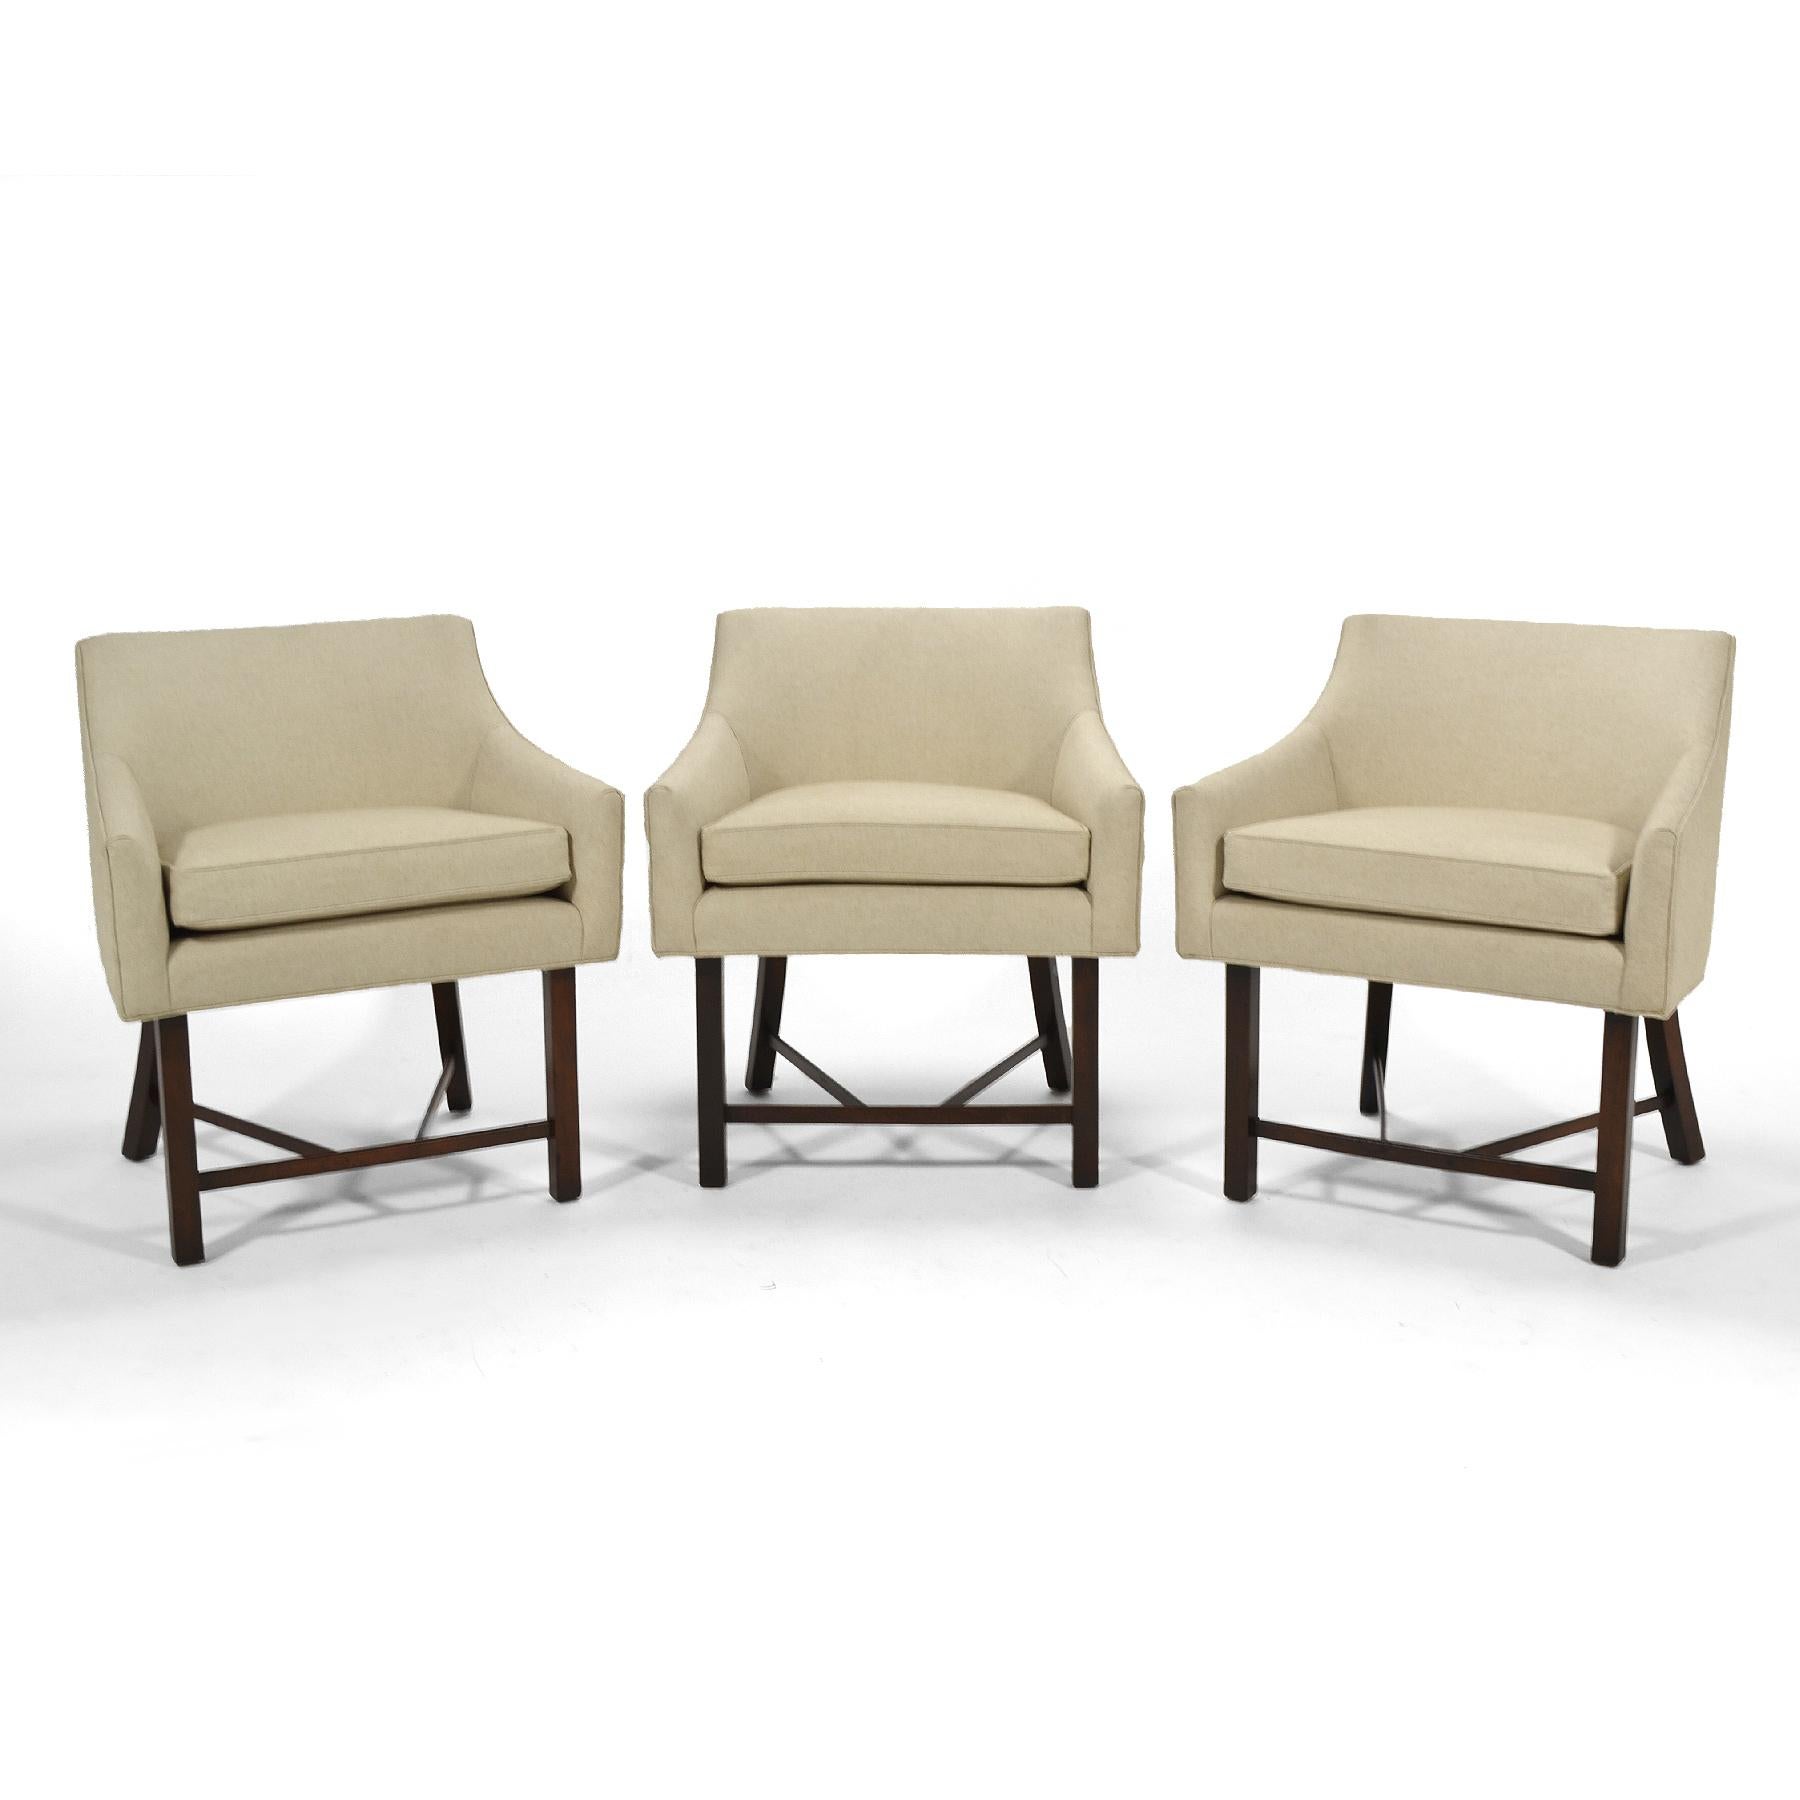 These light, lithe and elegant armchairs by Harvey Probber are scaled perfectly to serve as part of a larger seating group or on their own as occasional chairs. Their proportions and profile make them beautiful from every angle and their